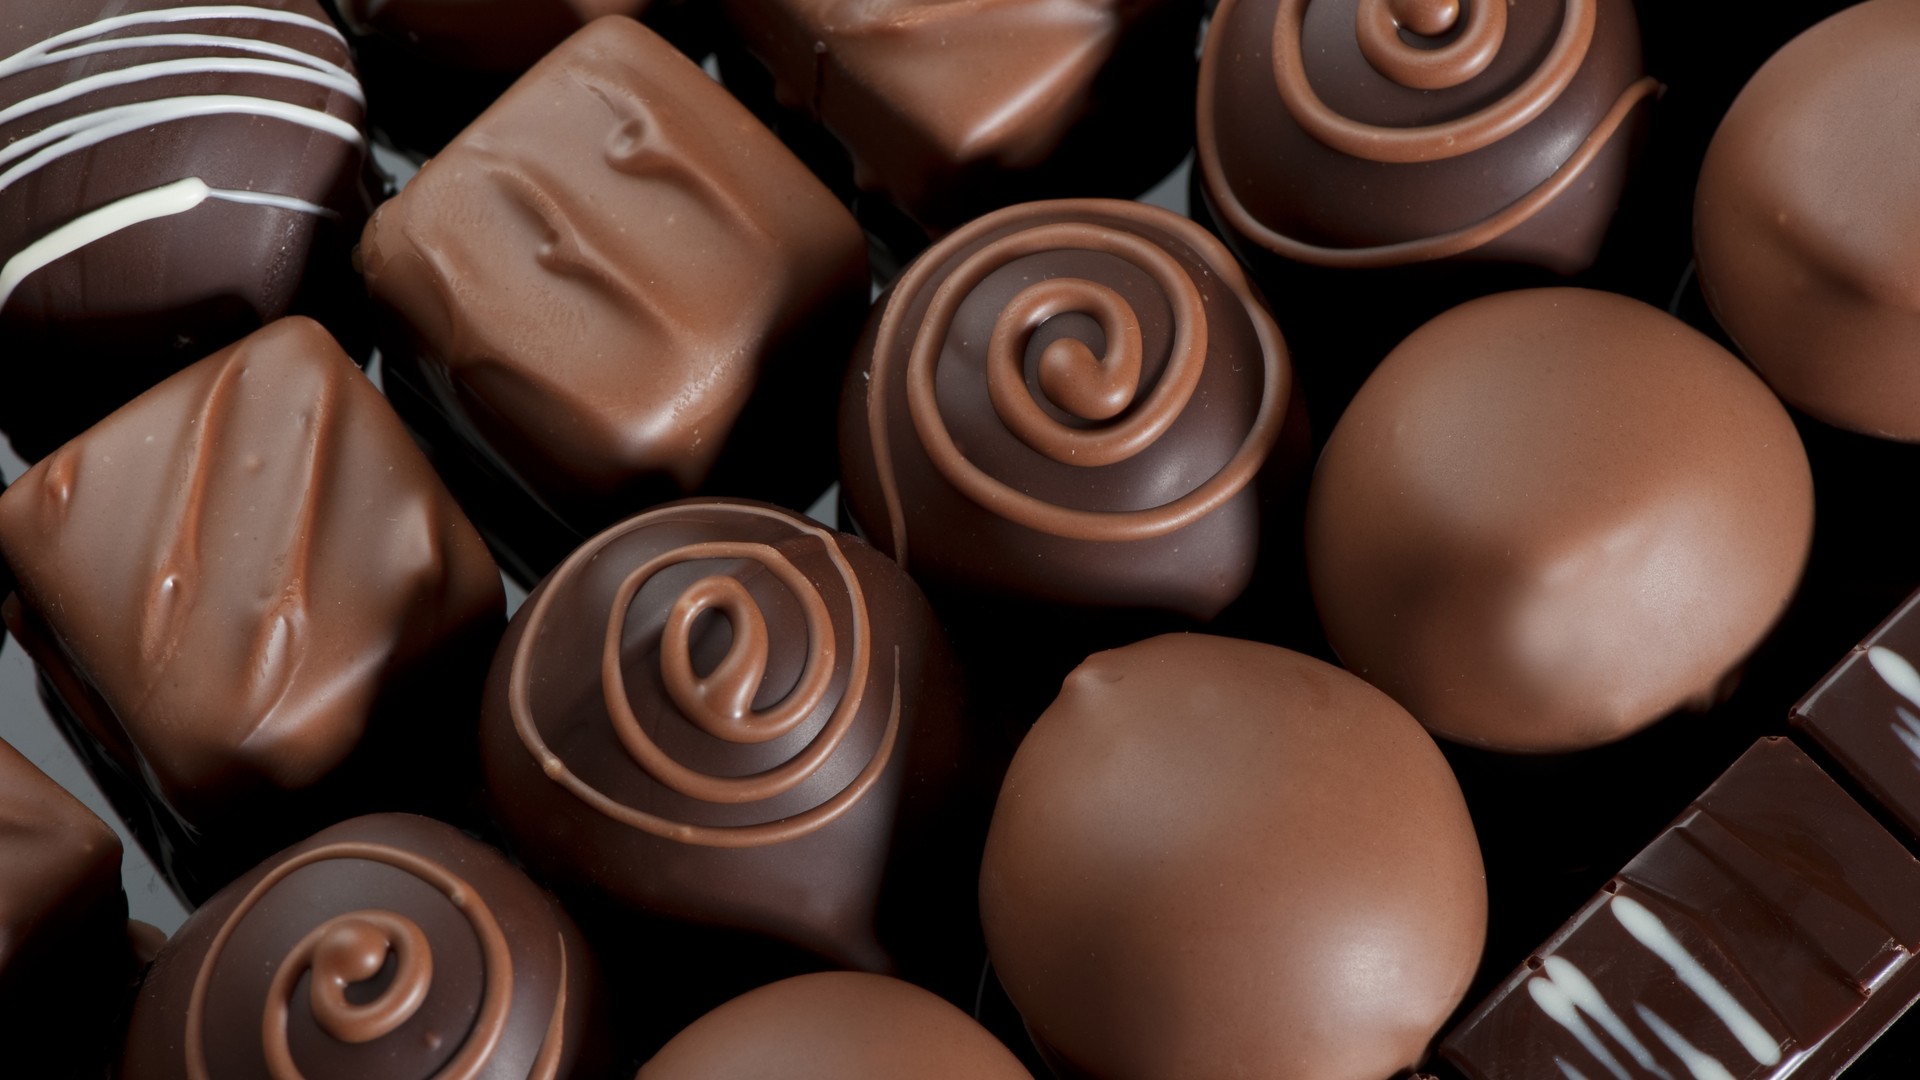 General 1920x1080 chocolate food sweets